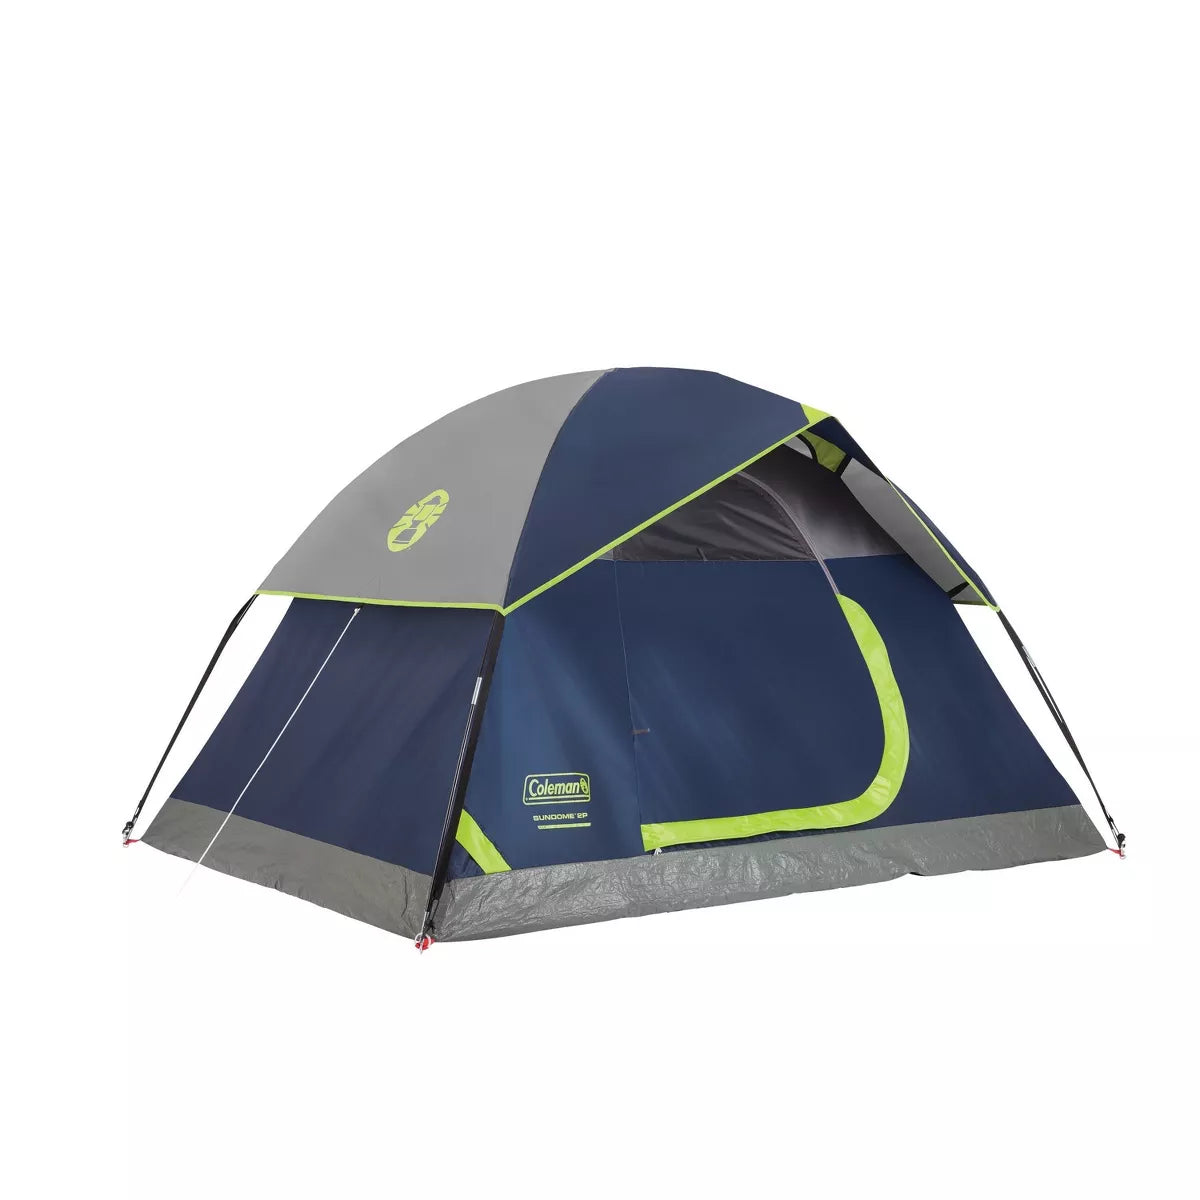 COLEMAN SUNDOME 2-PERSON CAMPING TENT NAVY